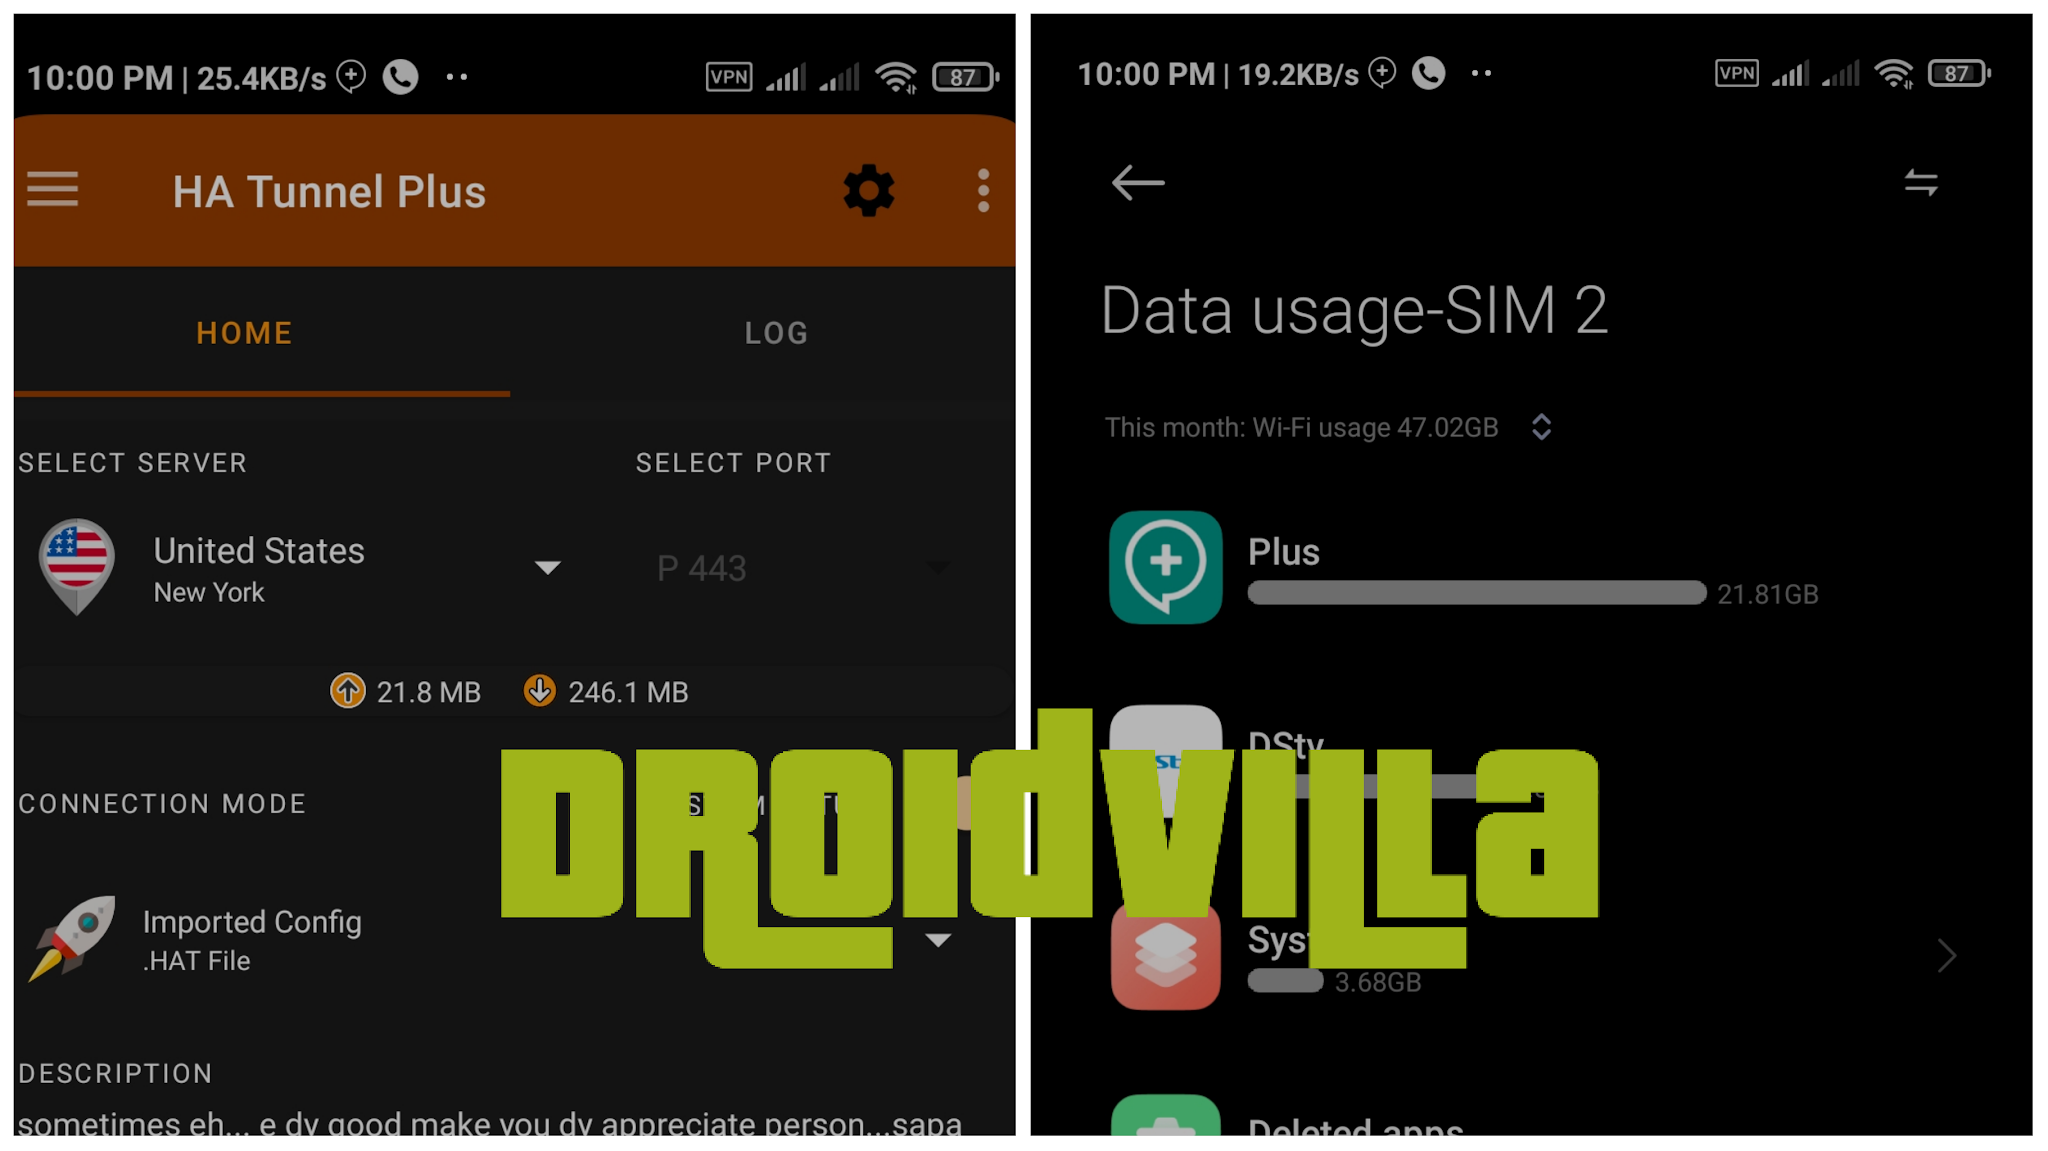 download-glo-unlimited-free-browsing-ha-tunnel-config-file-100-working-droidvilla-tech-how-to-free-browsing-tips-and-tricks